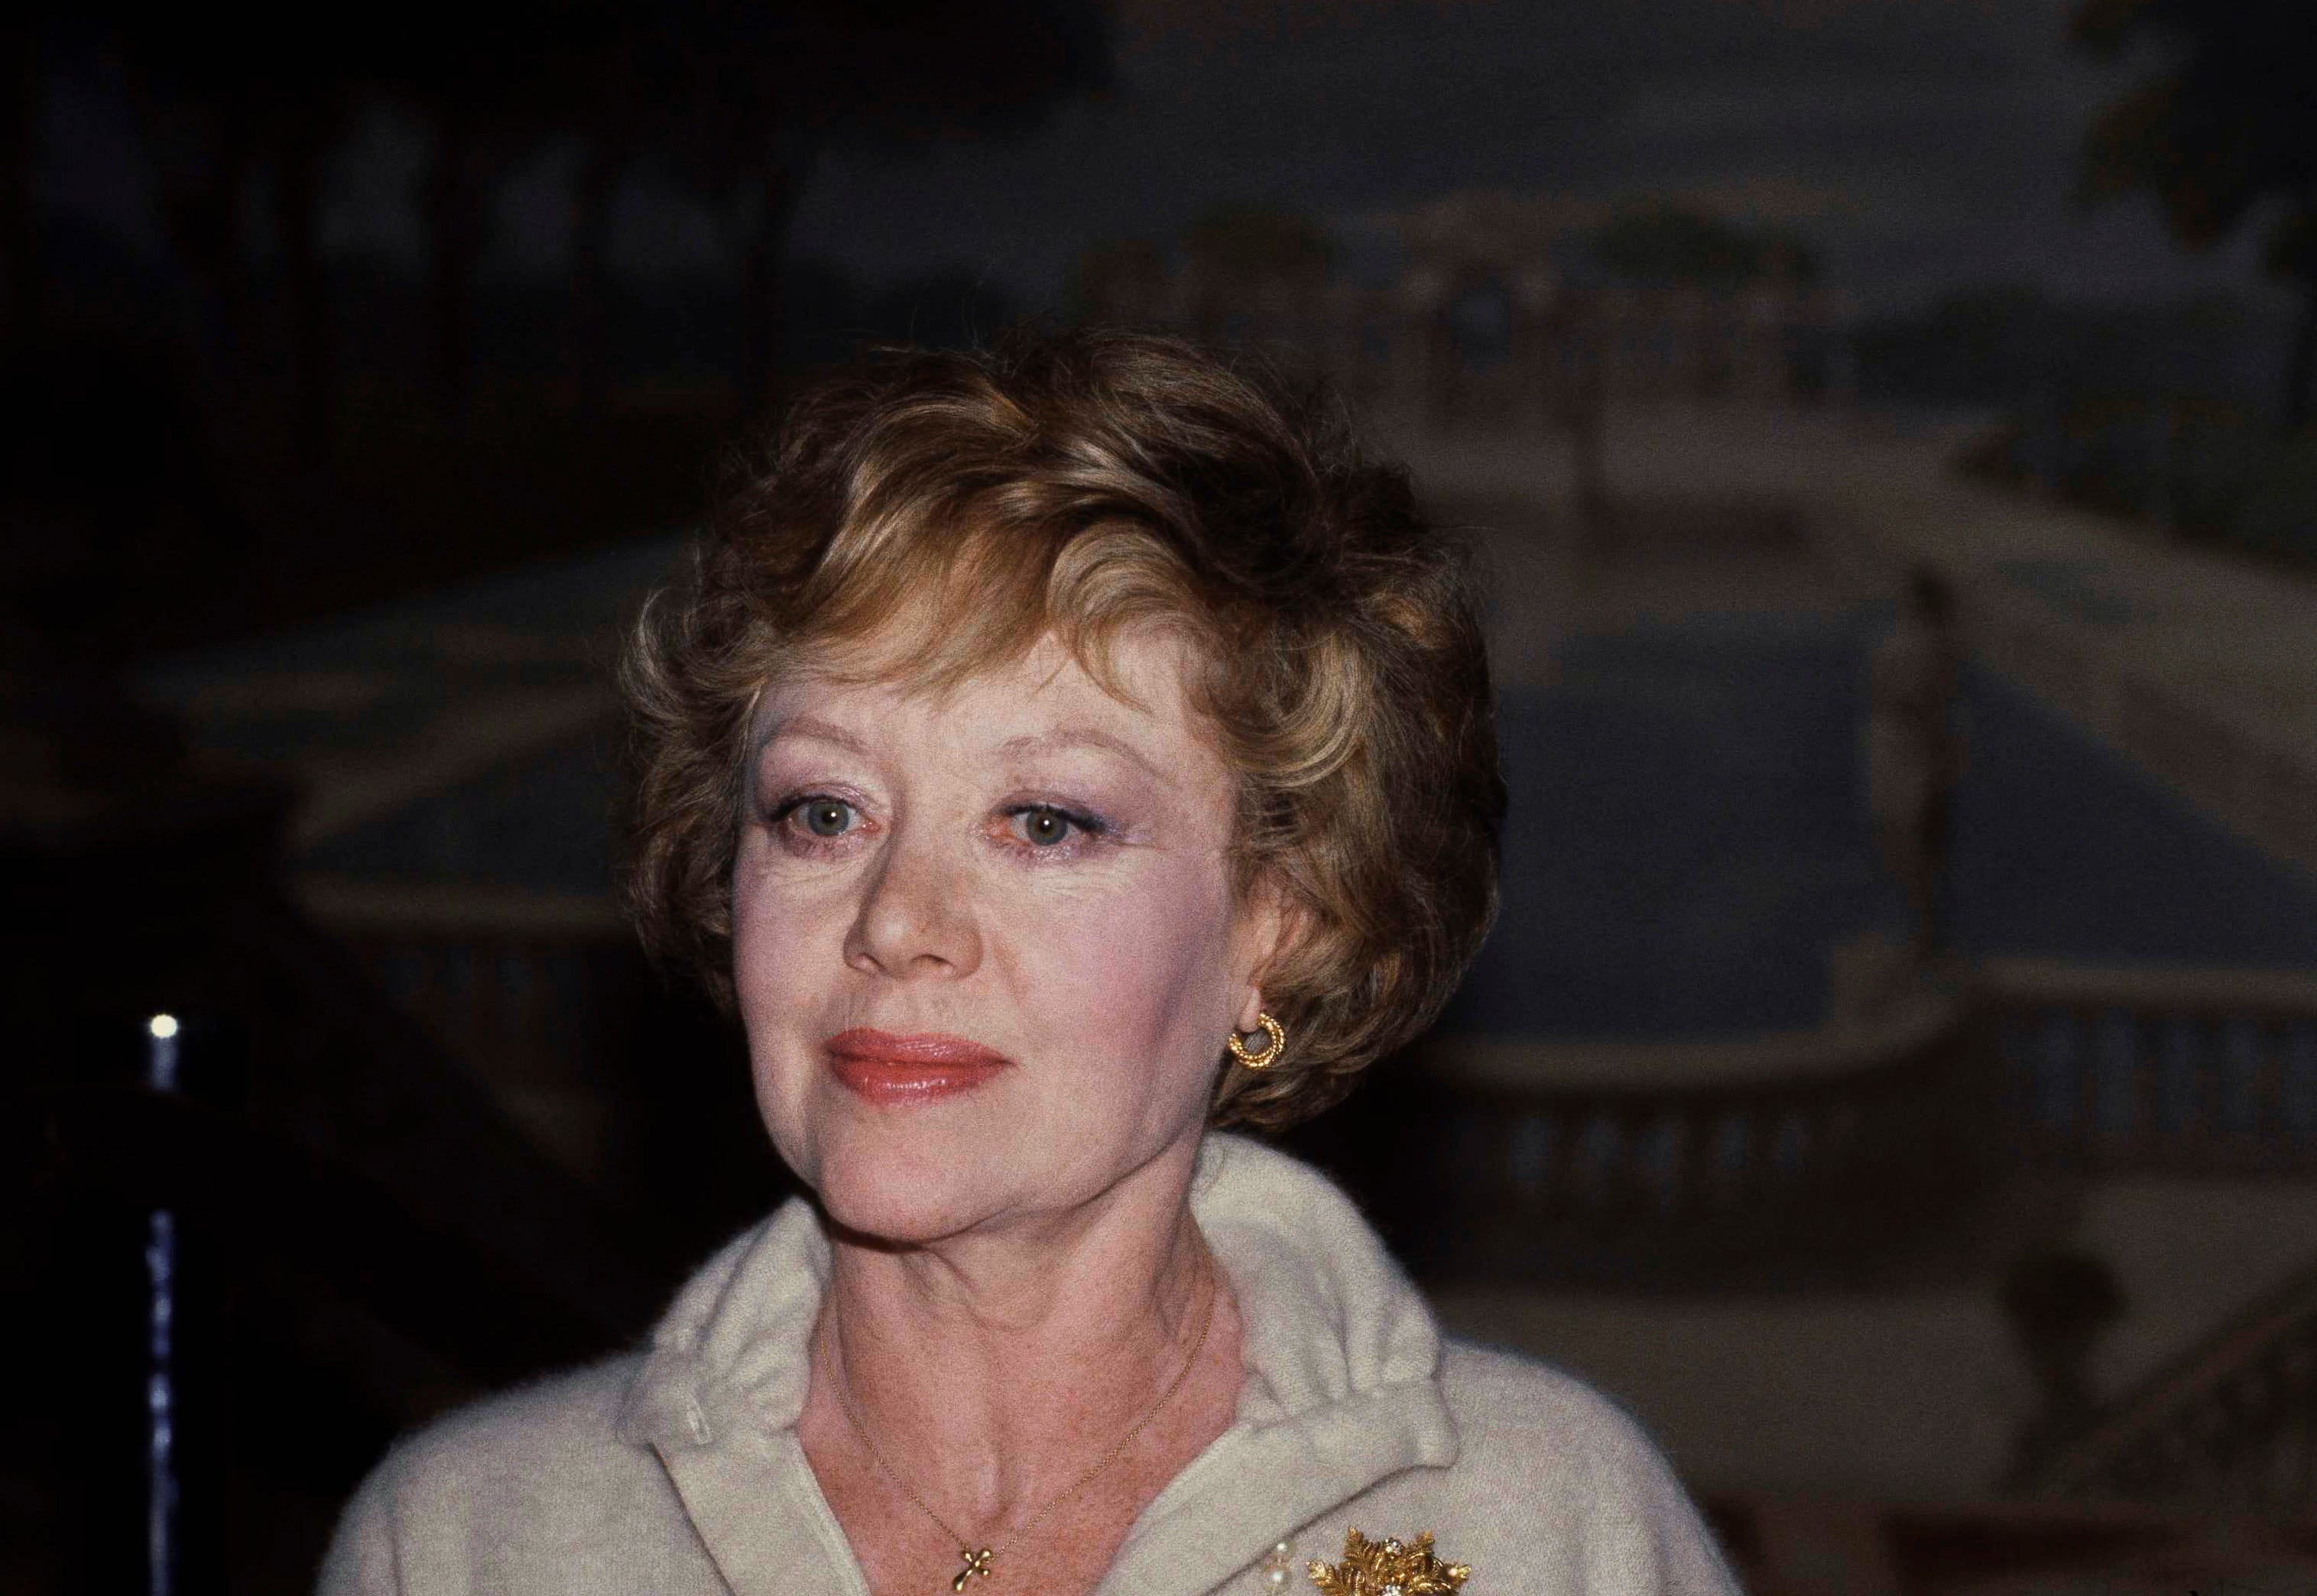 Glynis Johns Who Played Mrs Banks In Mary Poppins Dead At 100 The Last Of Old Hollywood